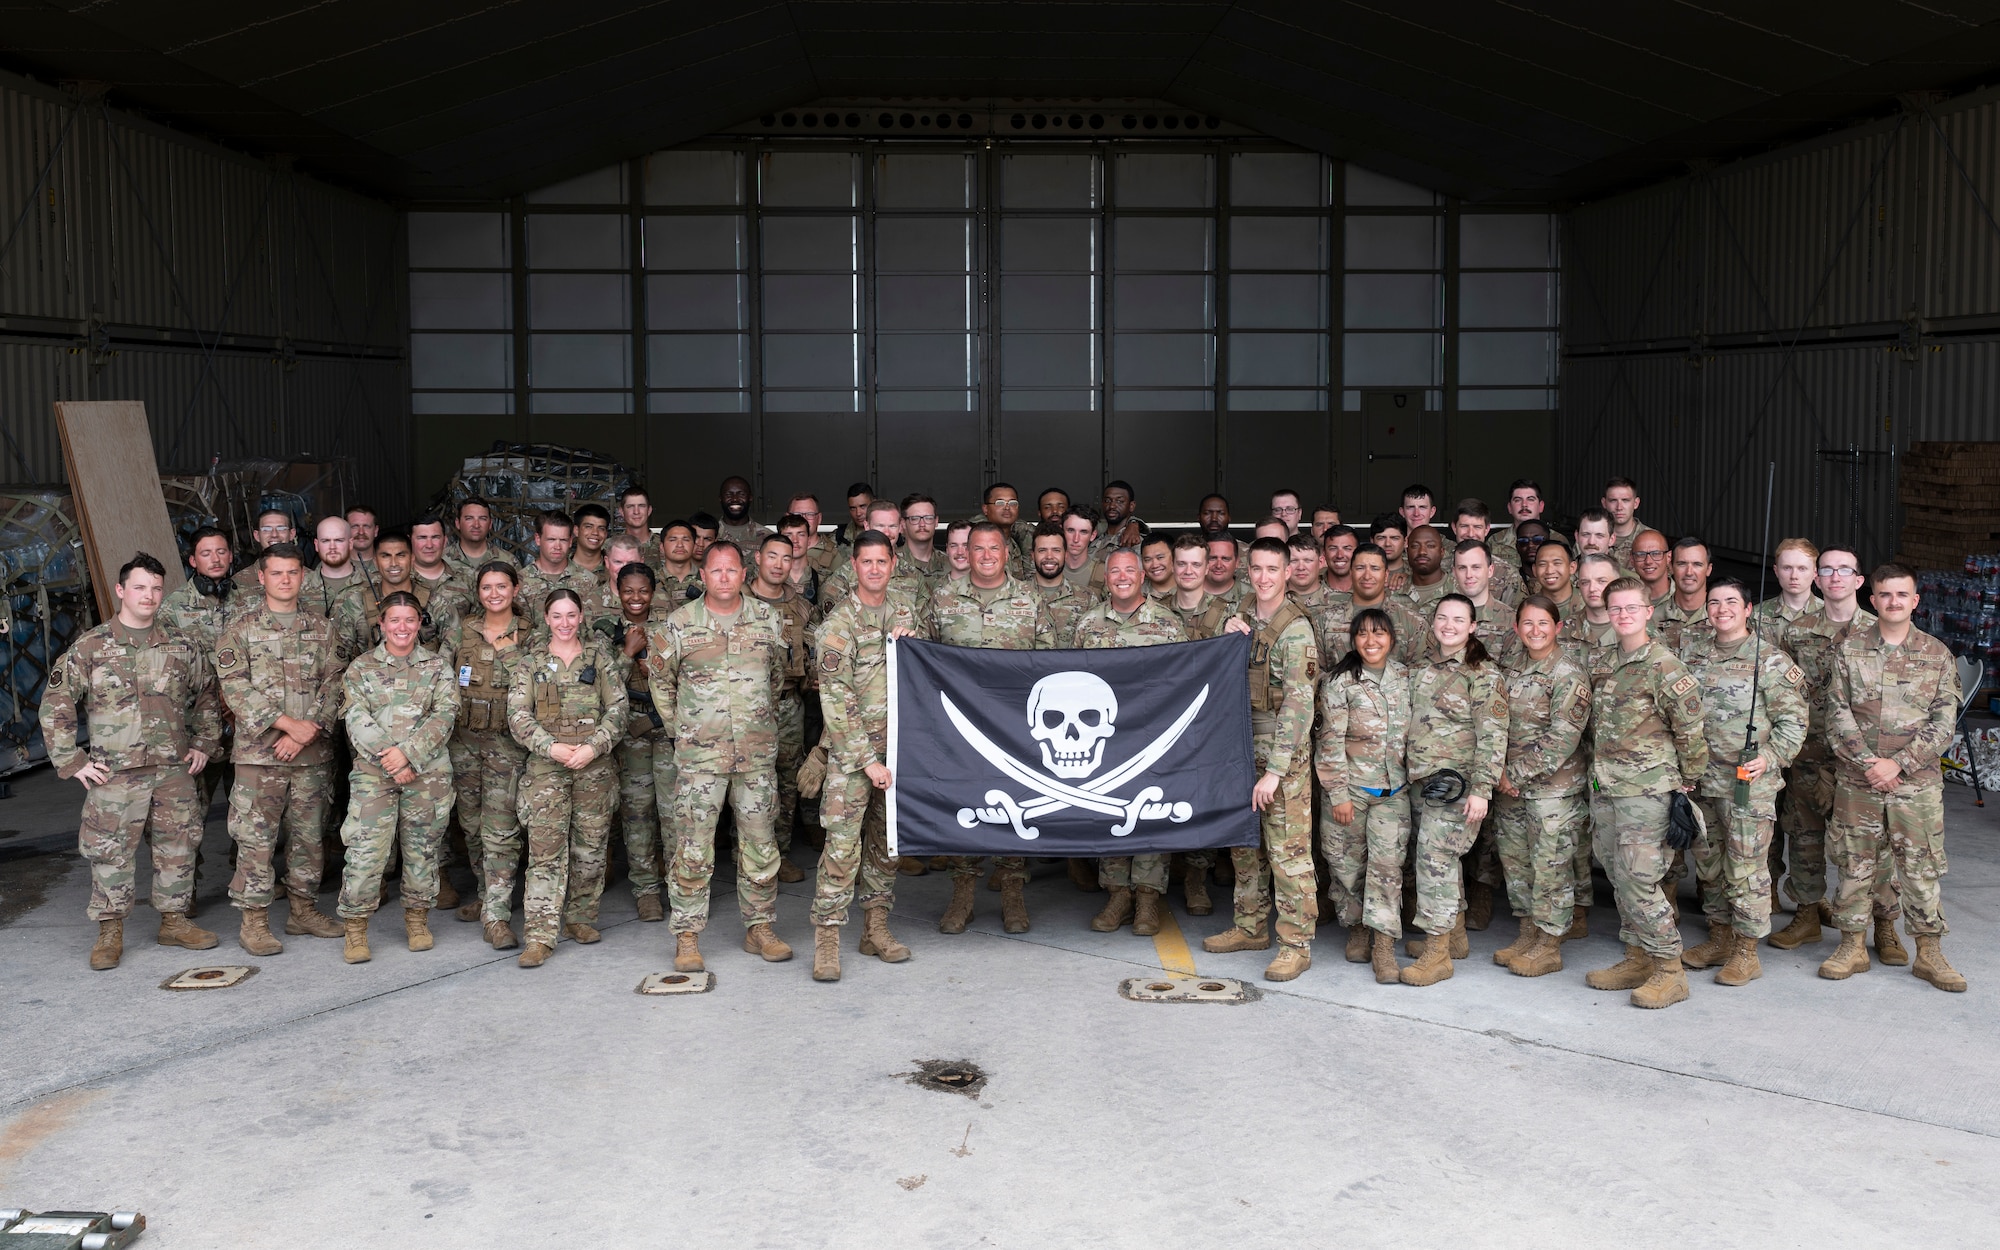 Members of the 621st CRG pose for a group photo.